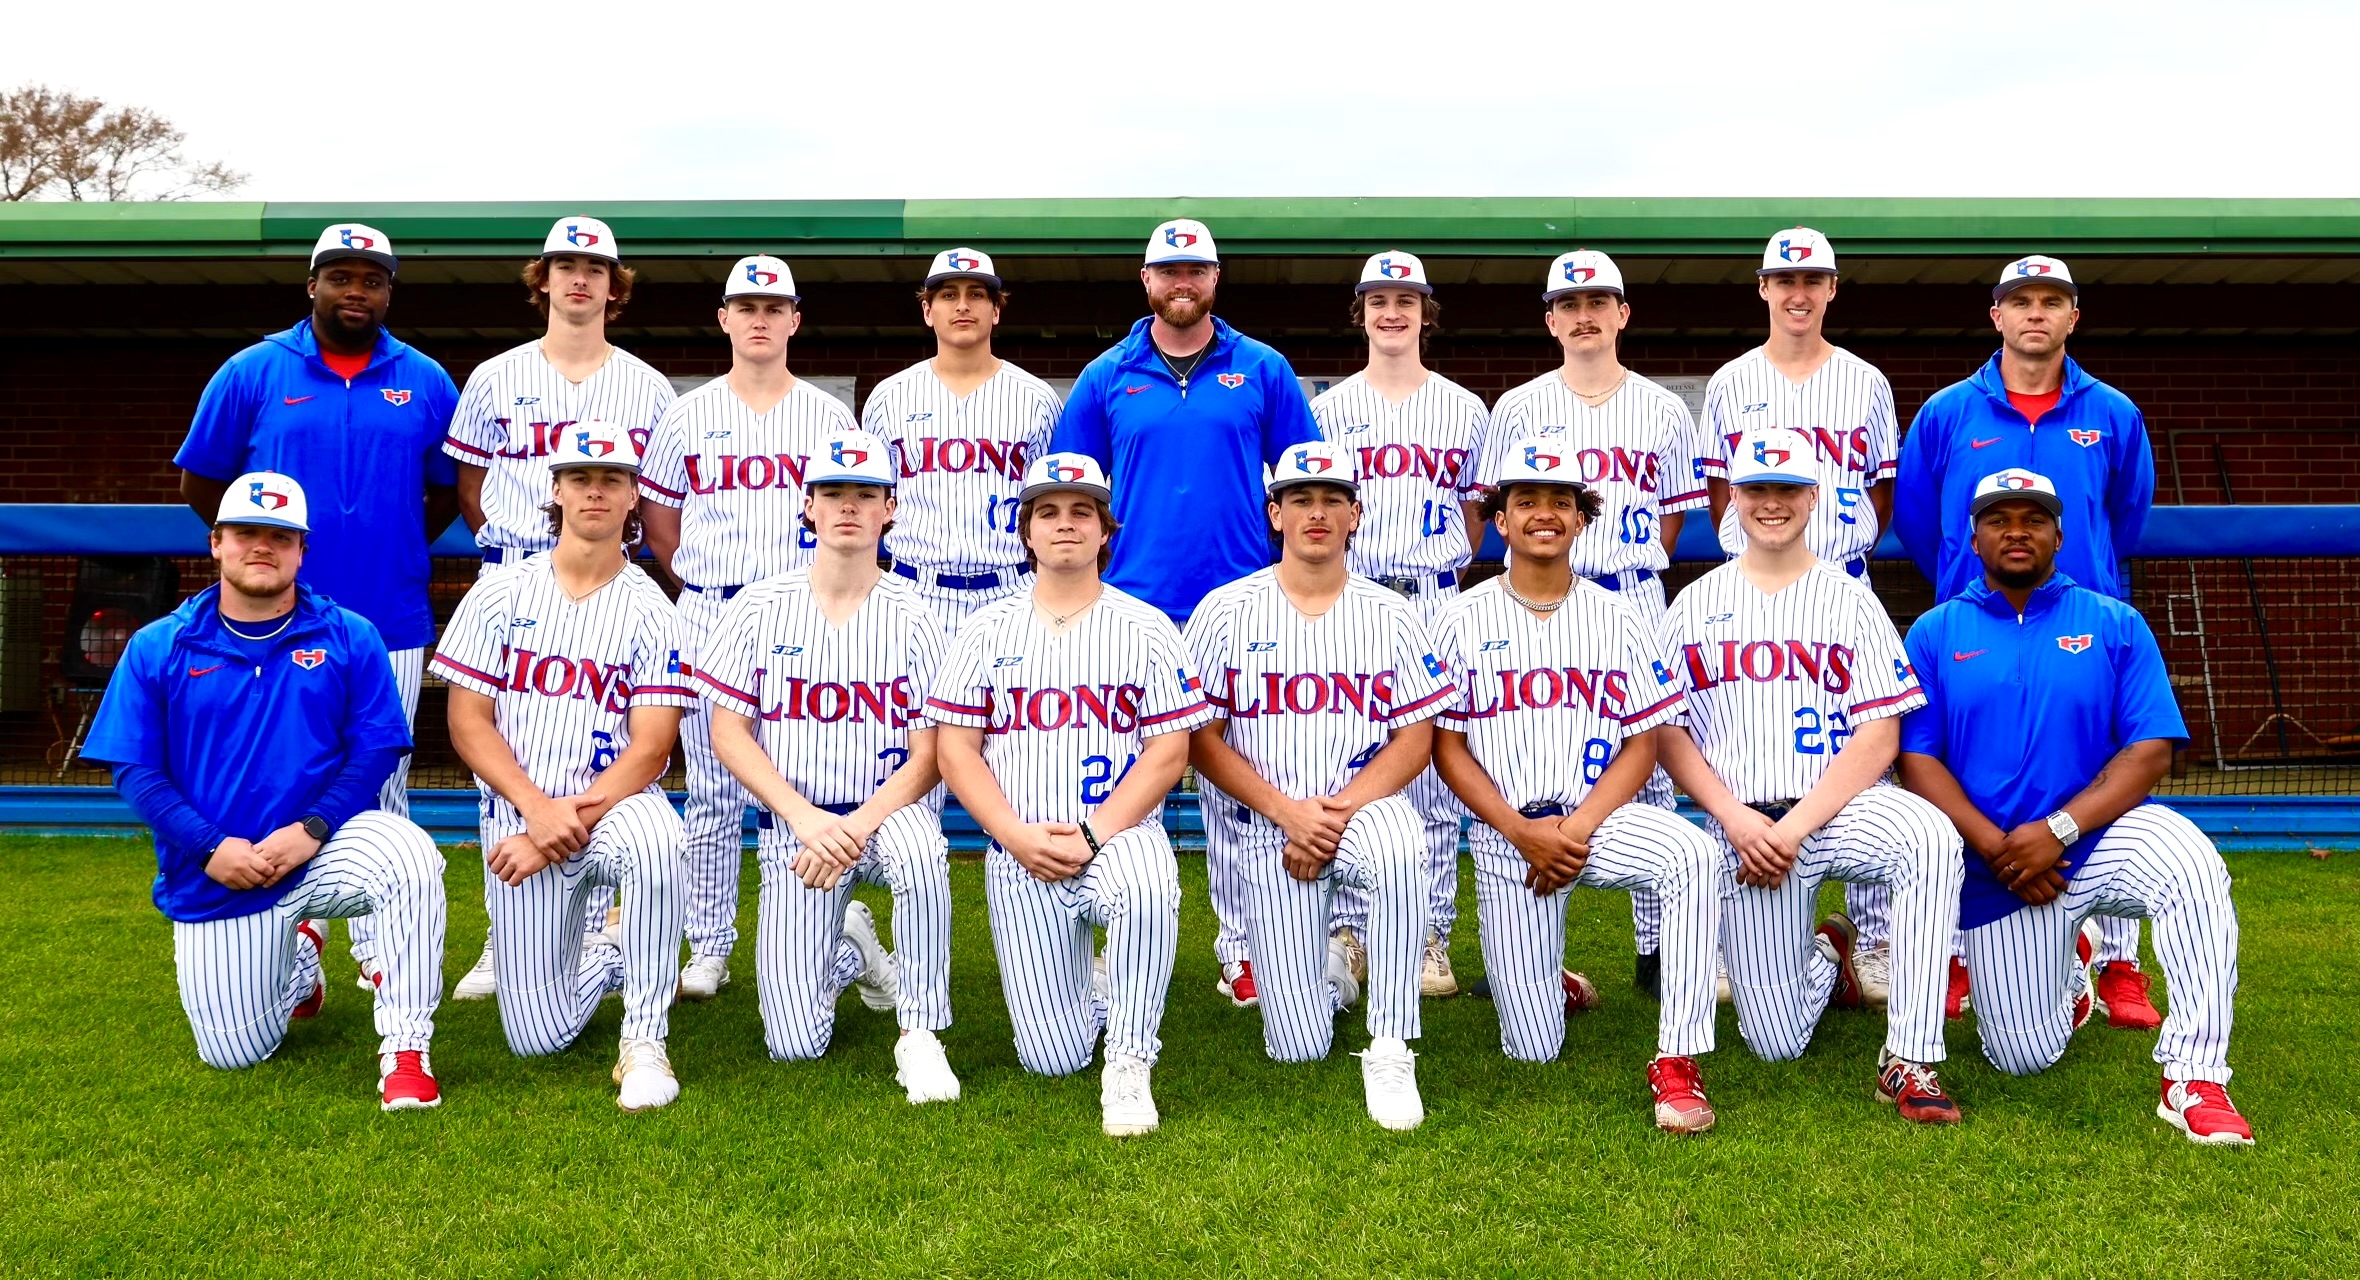 Henderson High School's Lions, in the playoffs now after a tough District 17-4A battle, host the Lufkin Hudson Hornets tonight in the UIL Class 4A bi-district round, a 6 p.m. start. The series continues in Lufkin Friday. (Photo courtesy of HENDERSON BASEBALL)